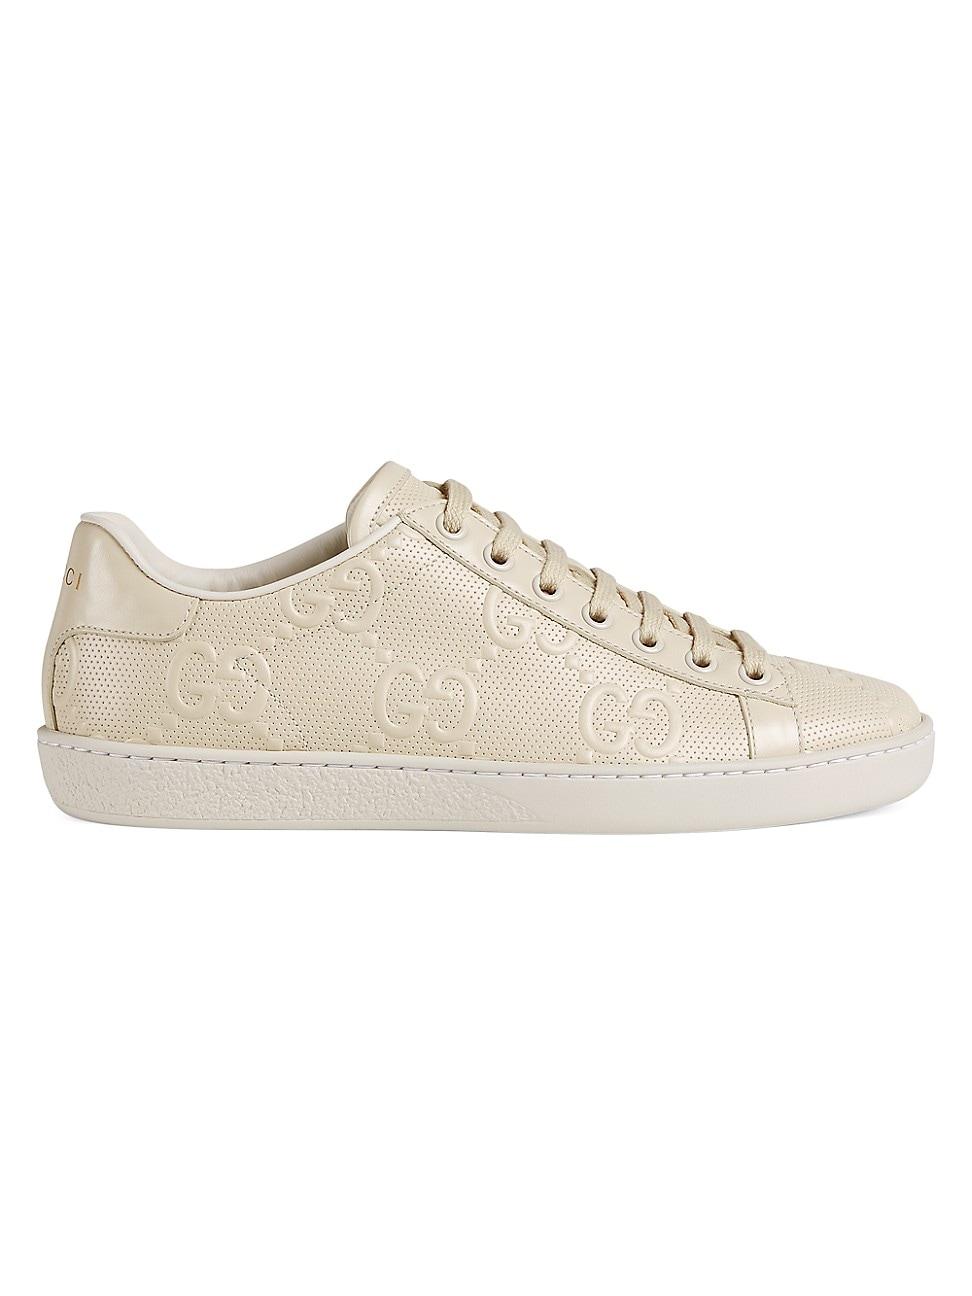 Gucci, Shoes, Gucci Womens Gg Embossed Sneaker